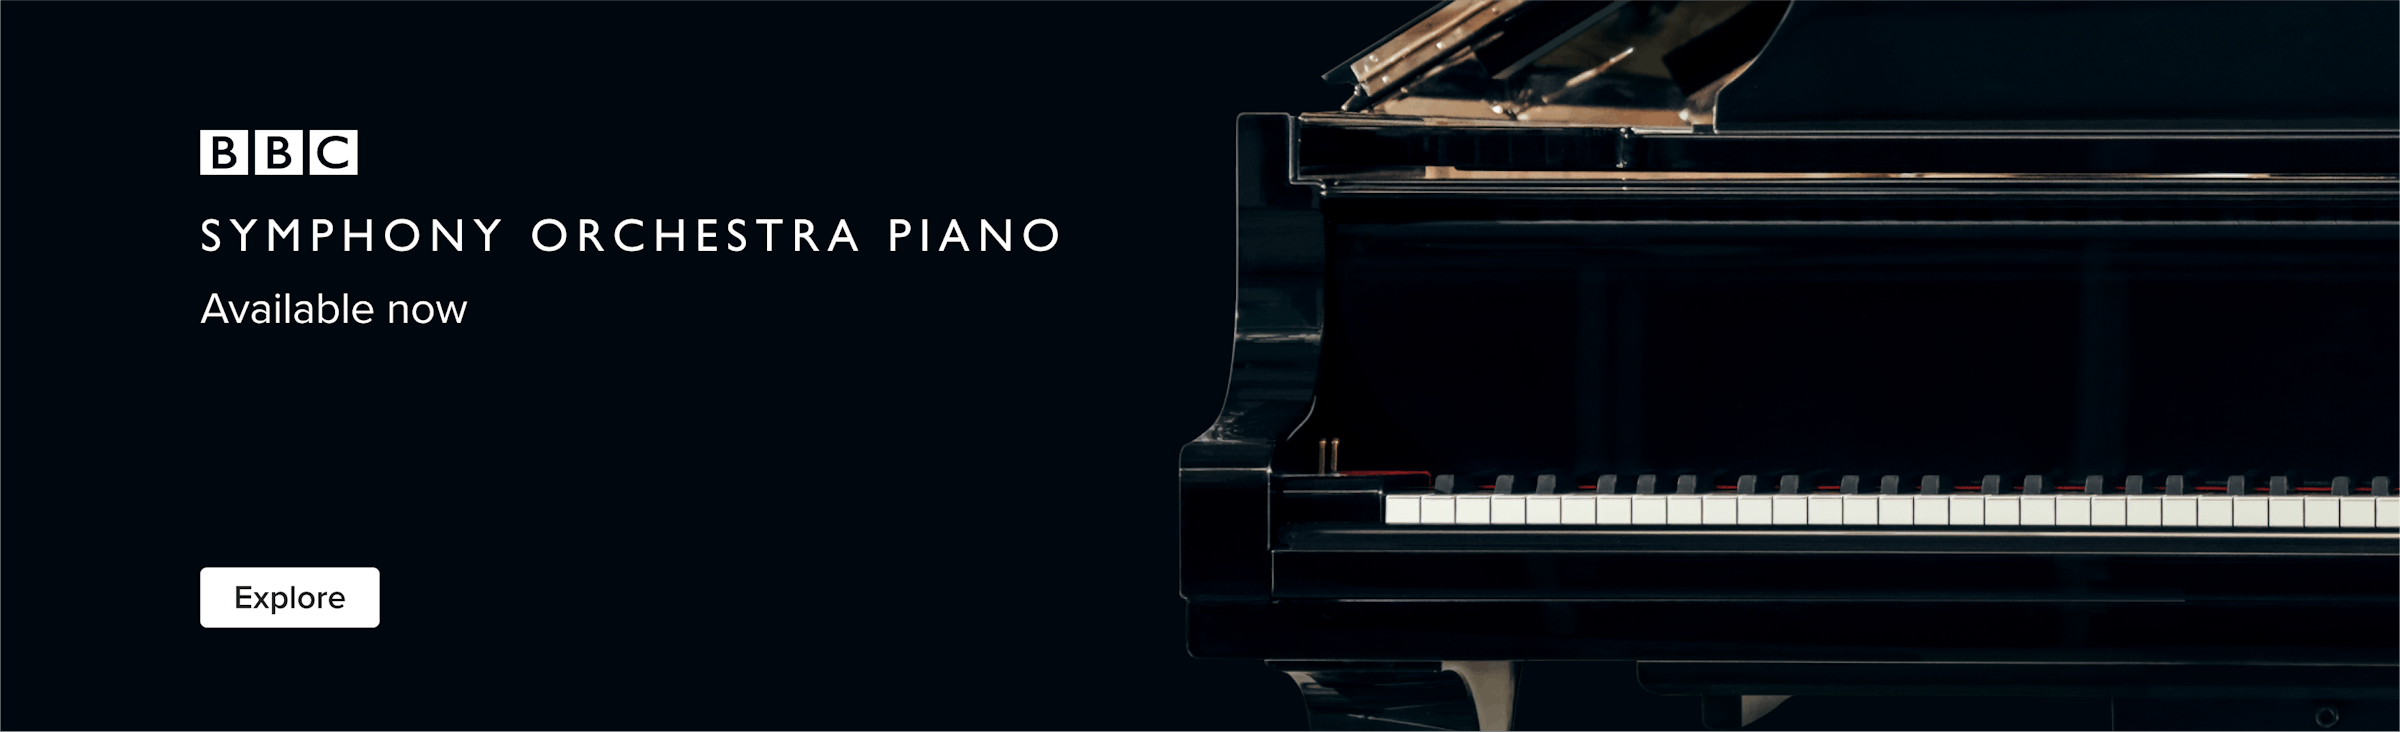 BBC Symphony Orchestra Piano. Available now.